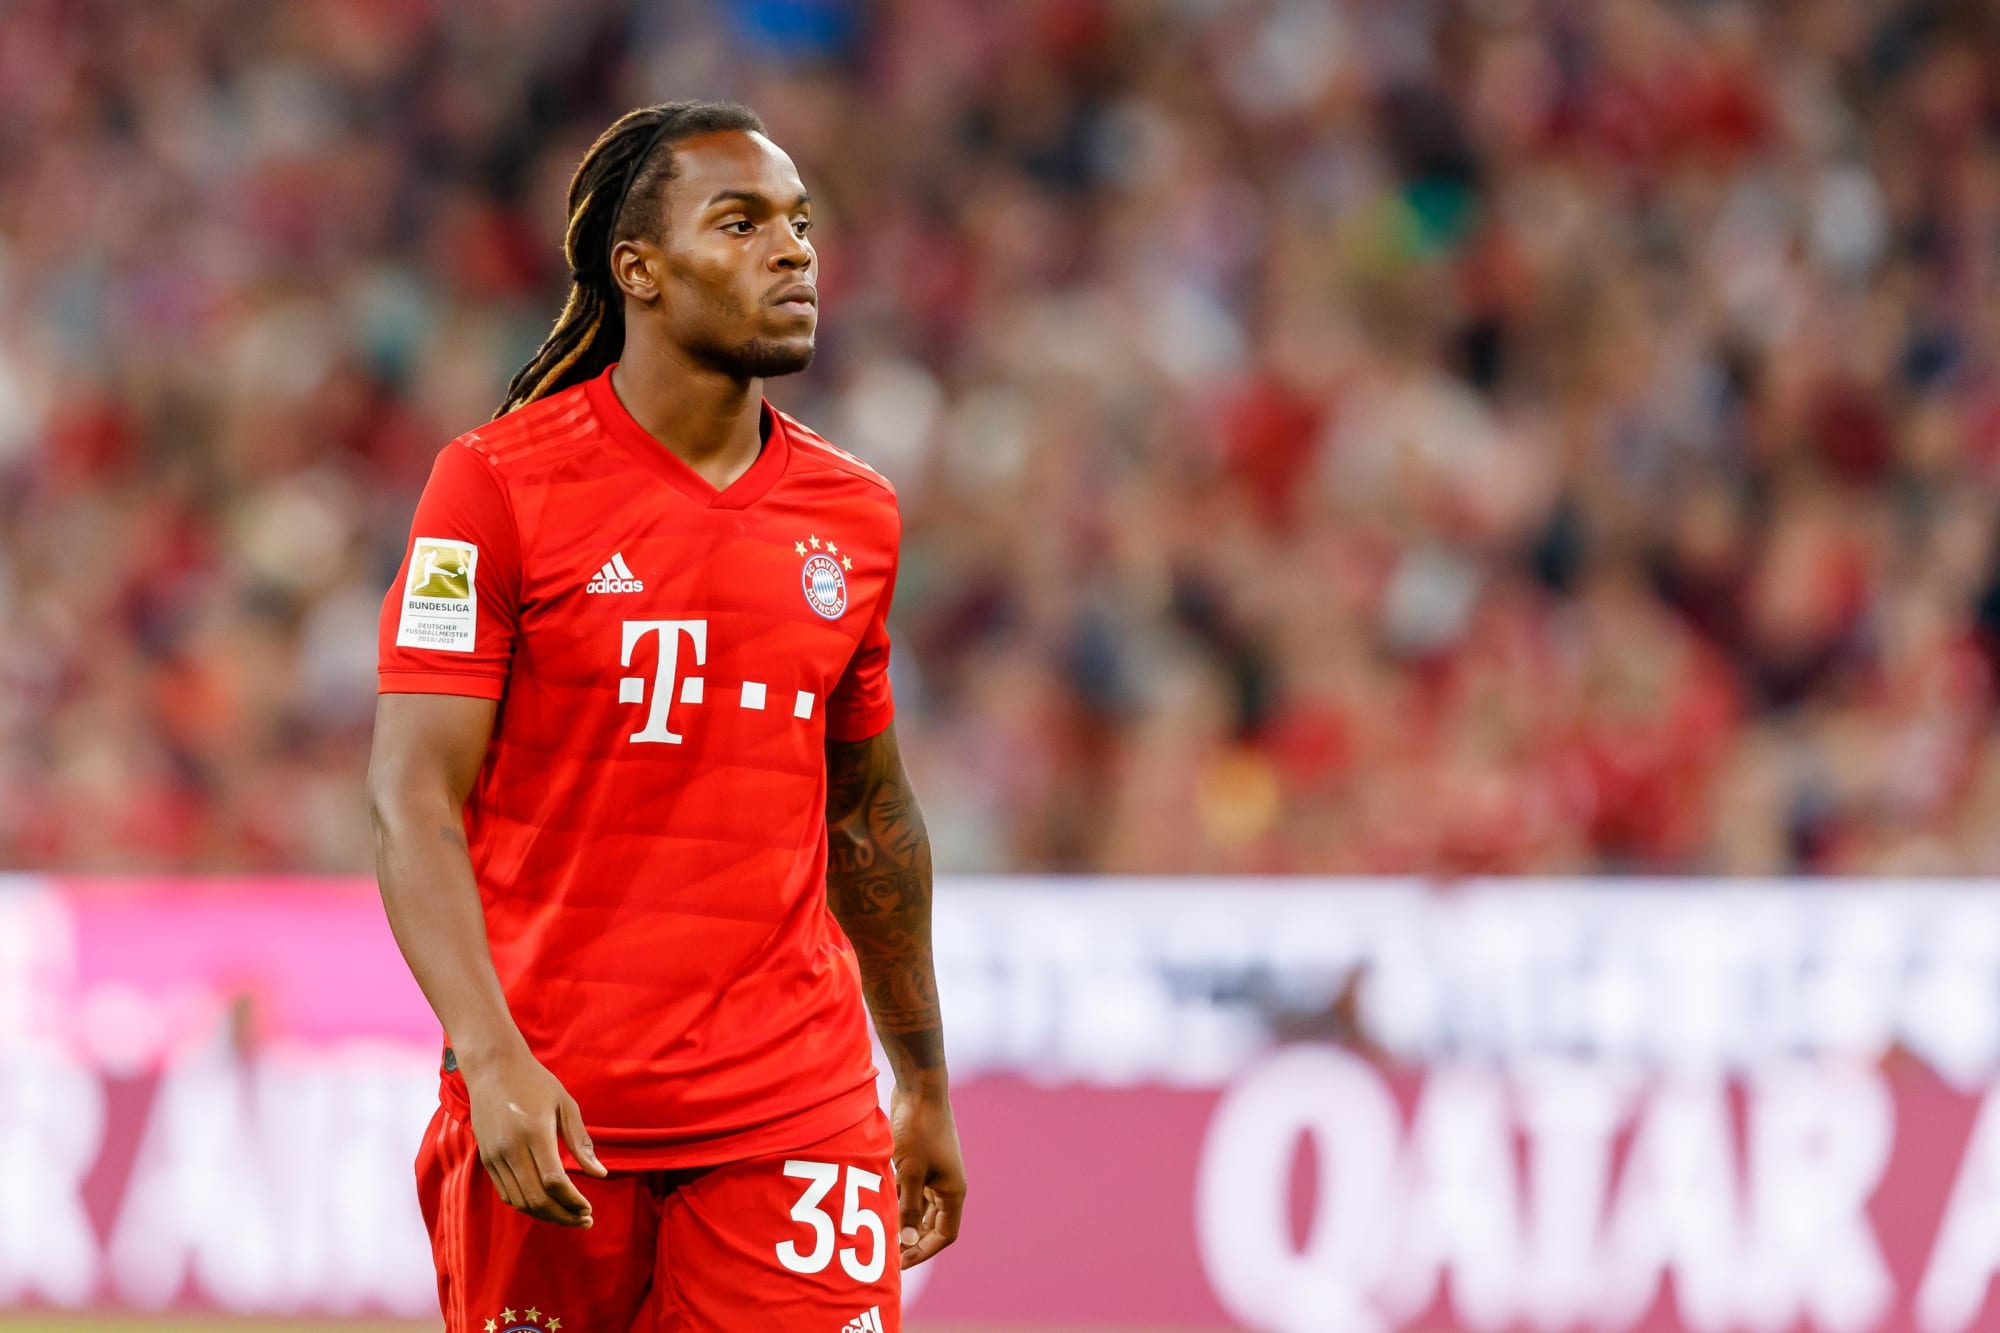 Renato Sanches leaves Bayern Munich to join Lille